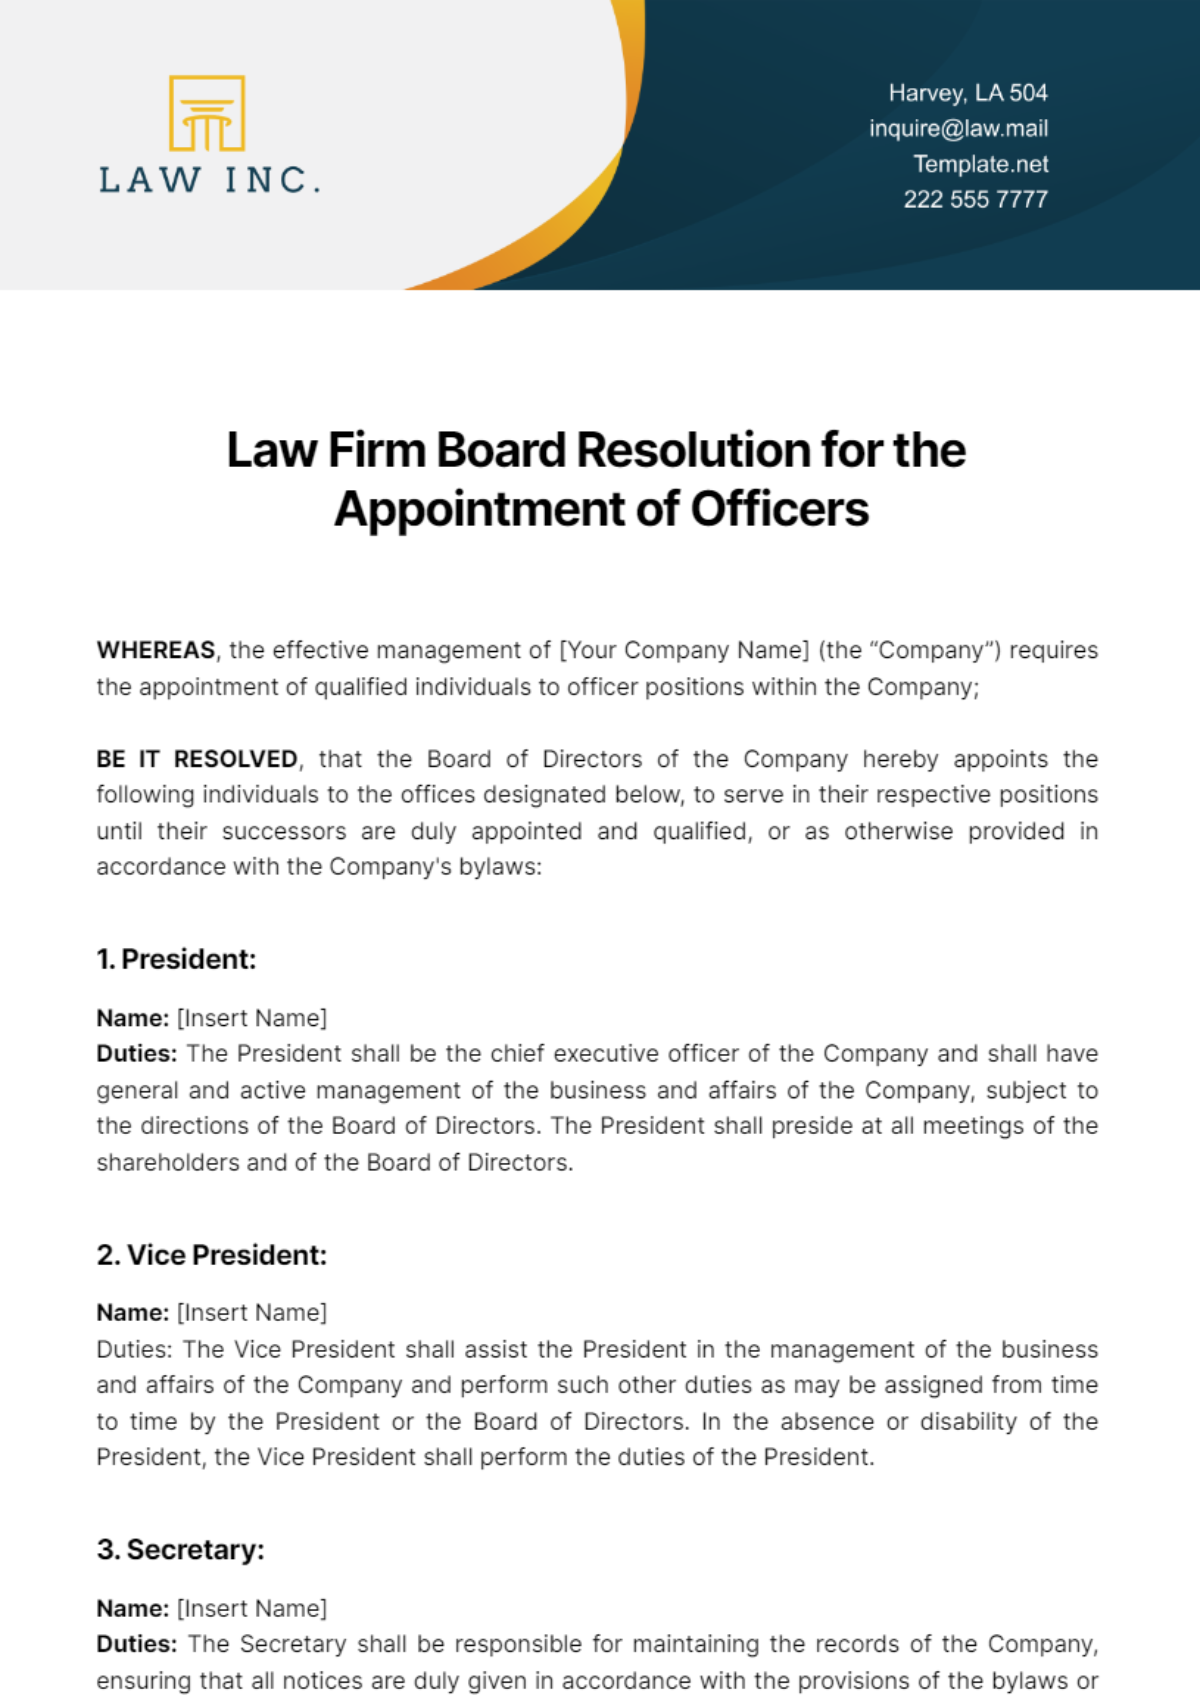 Free Law Firm Board Resolution for the Appointment of Officers Template